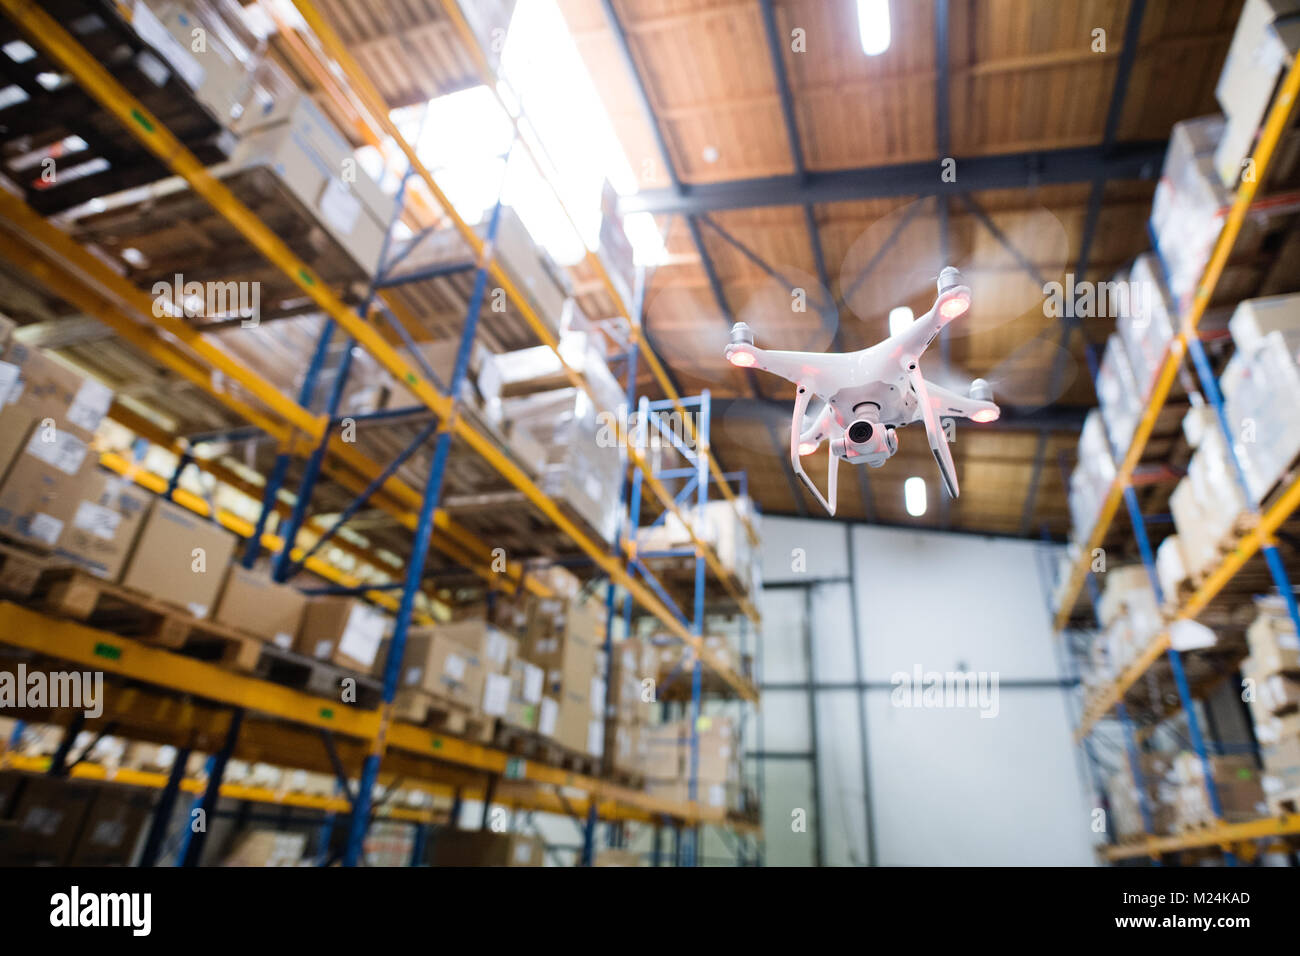 Drone flying inside the warehouse. Stock Photo